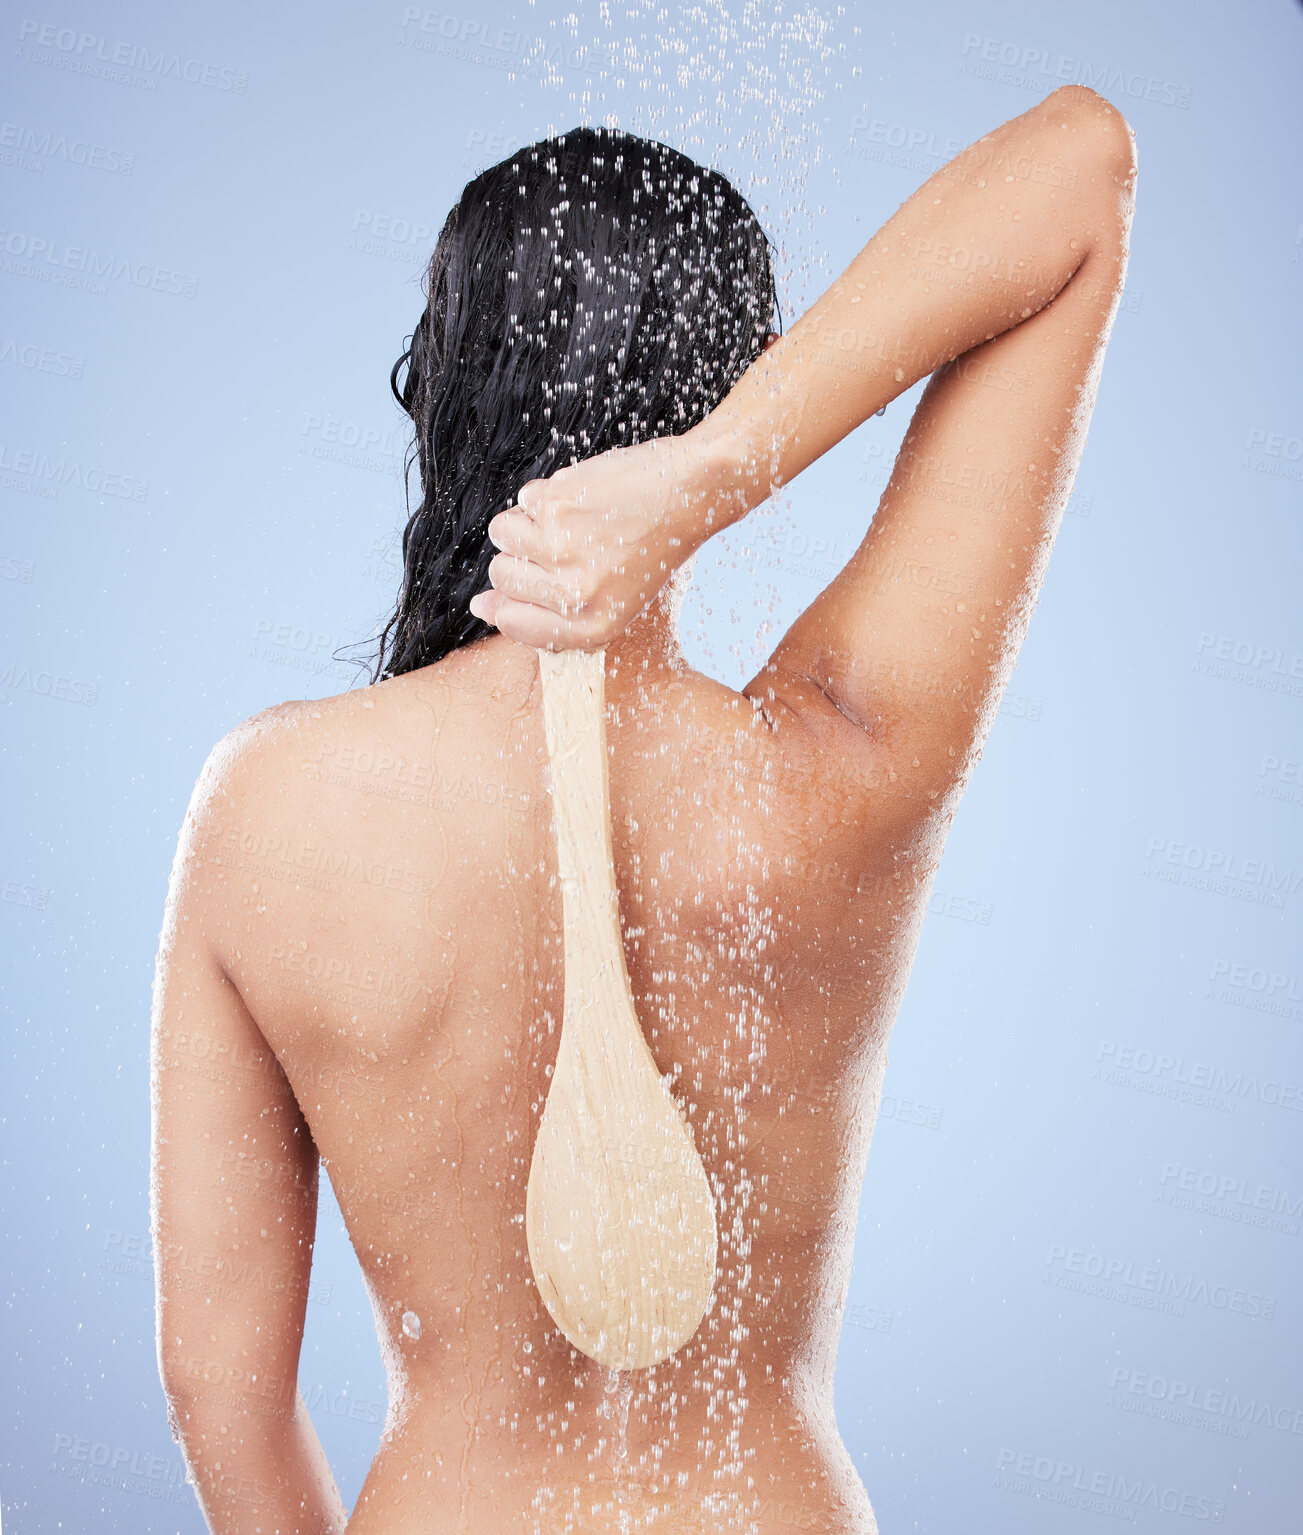 Buy stock photo Shot of an unrecognizable woman taking a shower against a blue background